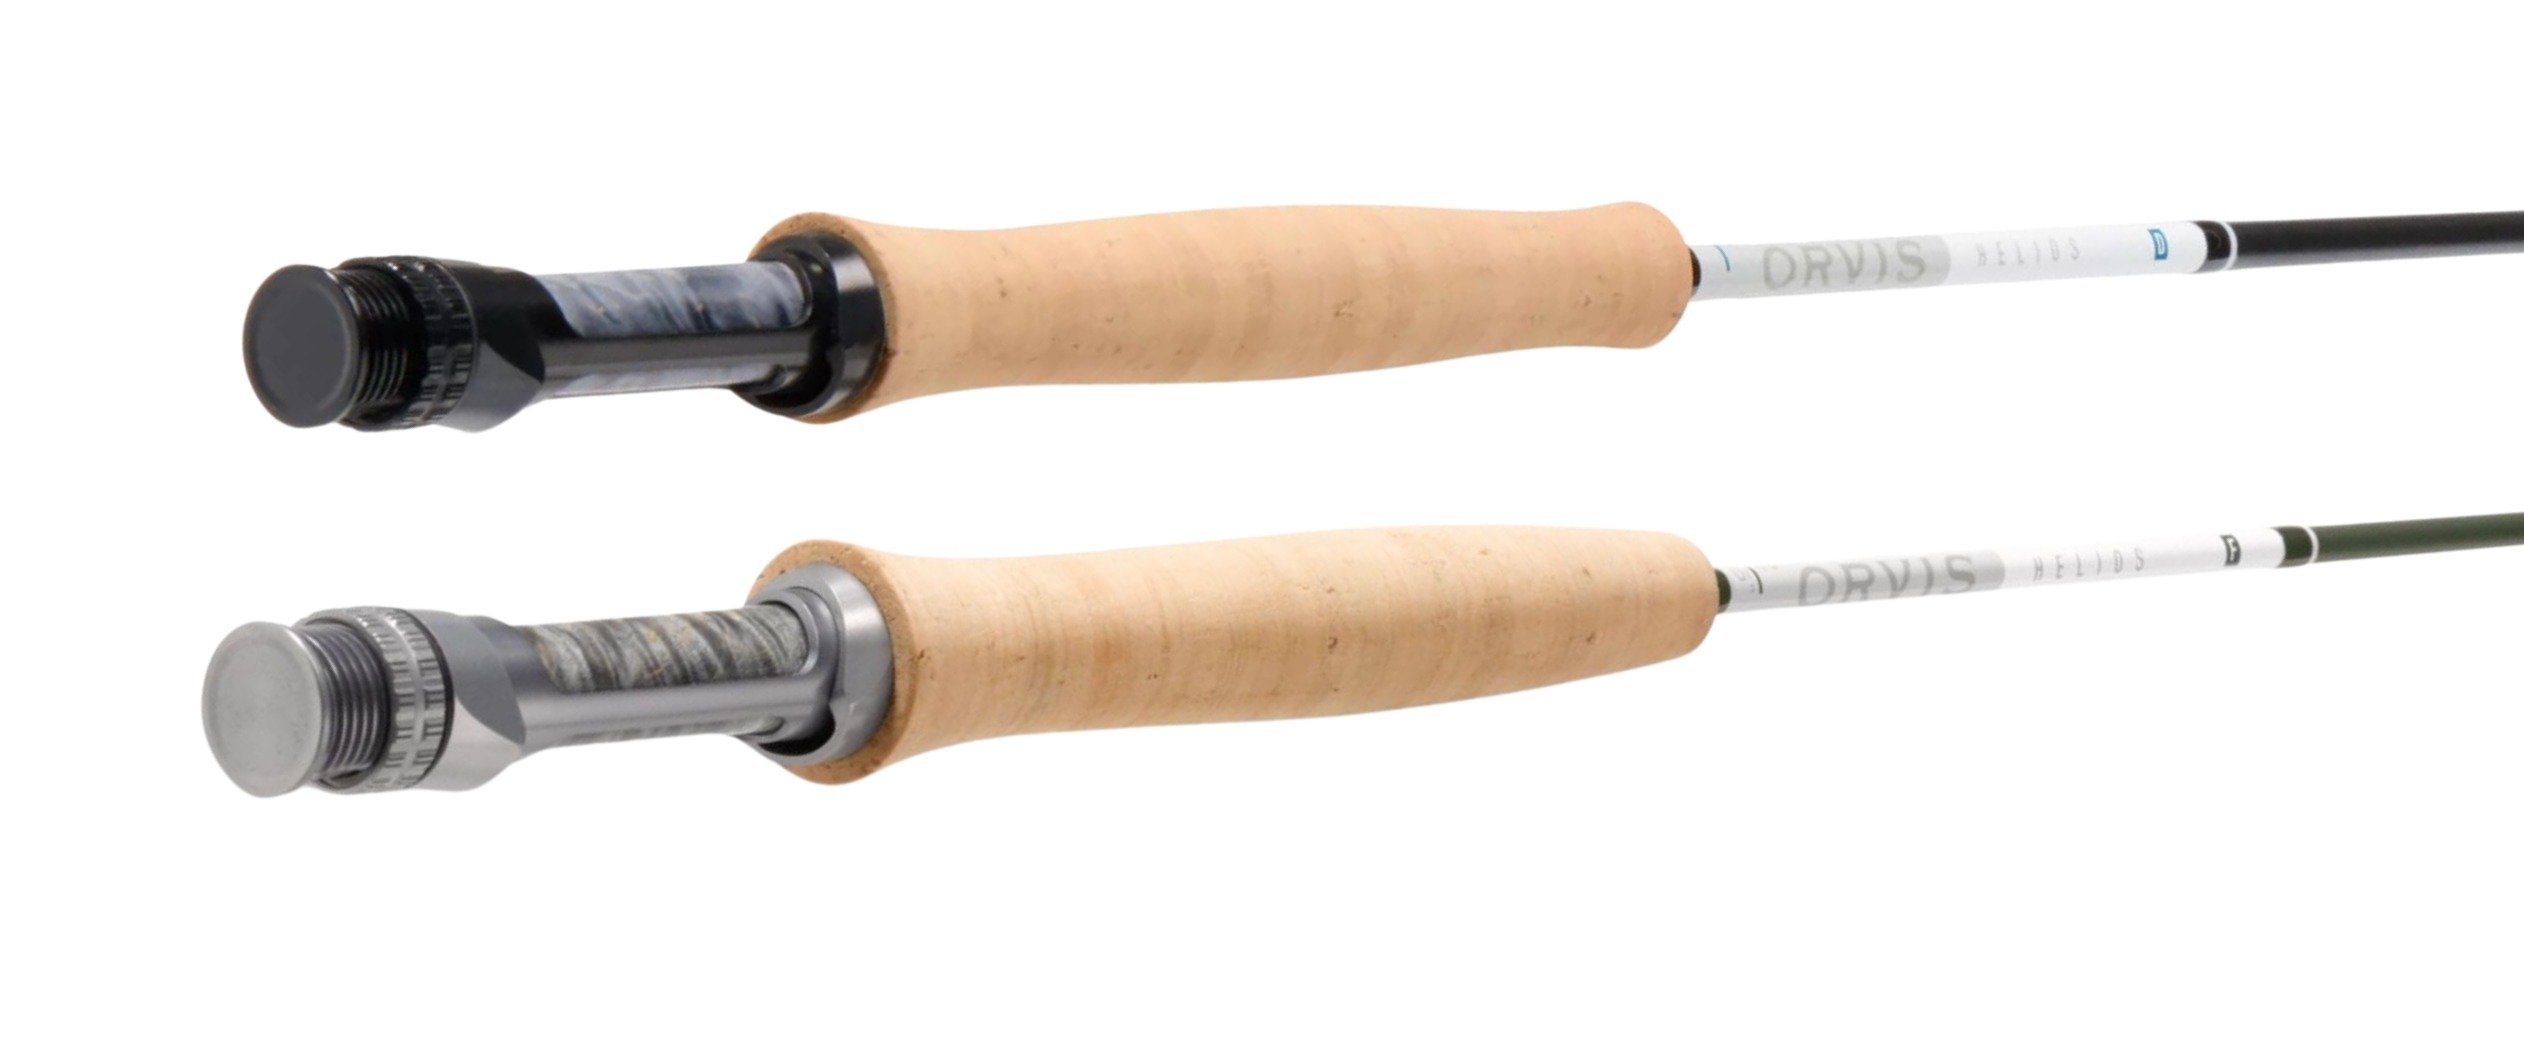 Shop Orvis Fly Rods: Helios D, Helios F, and More